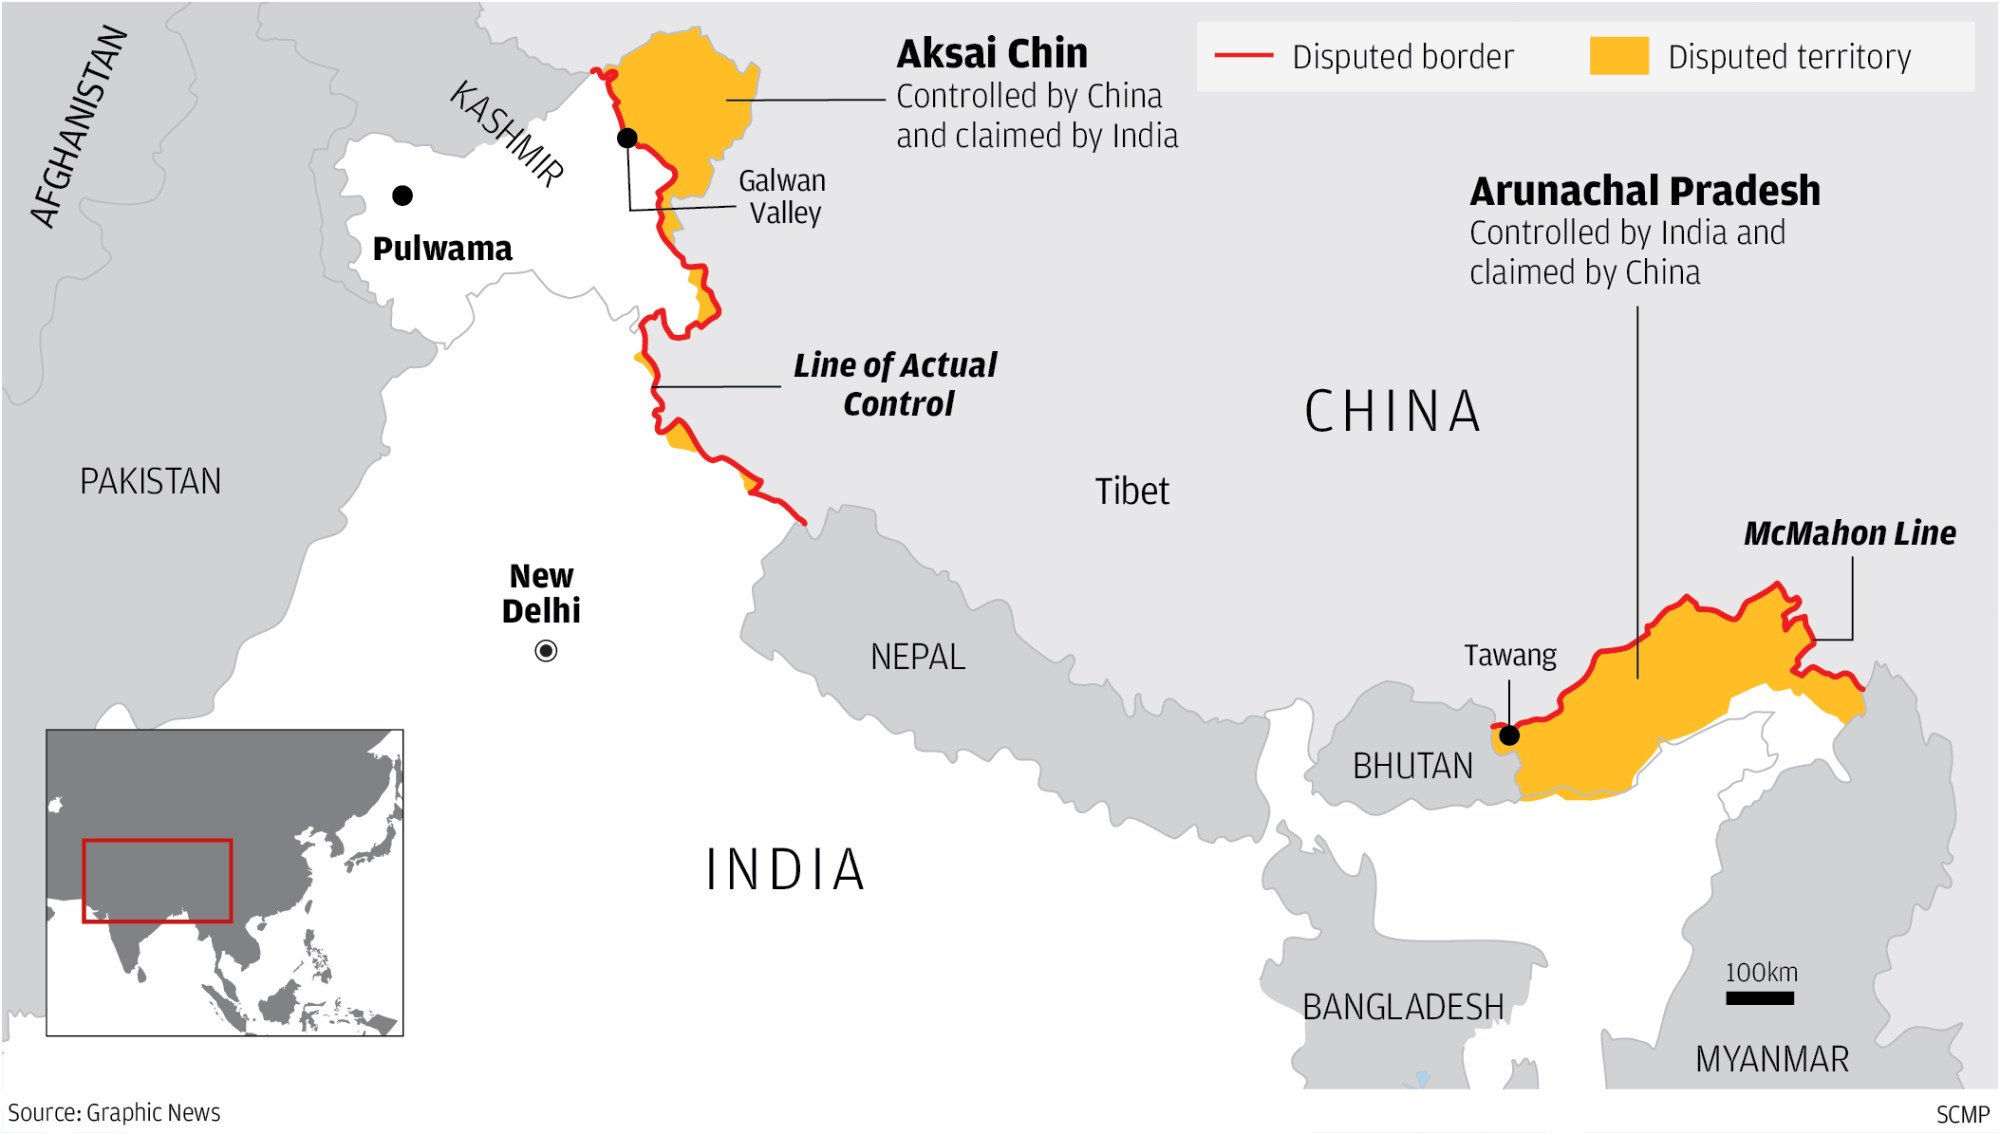 Chinas Moves To Assert Control Along Disputed Border Risk Further Tensions With India South